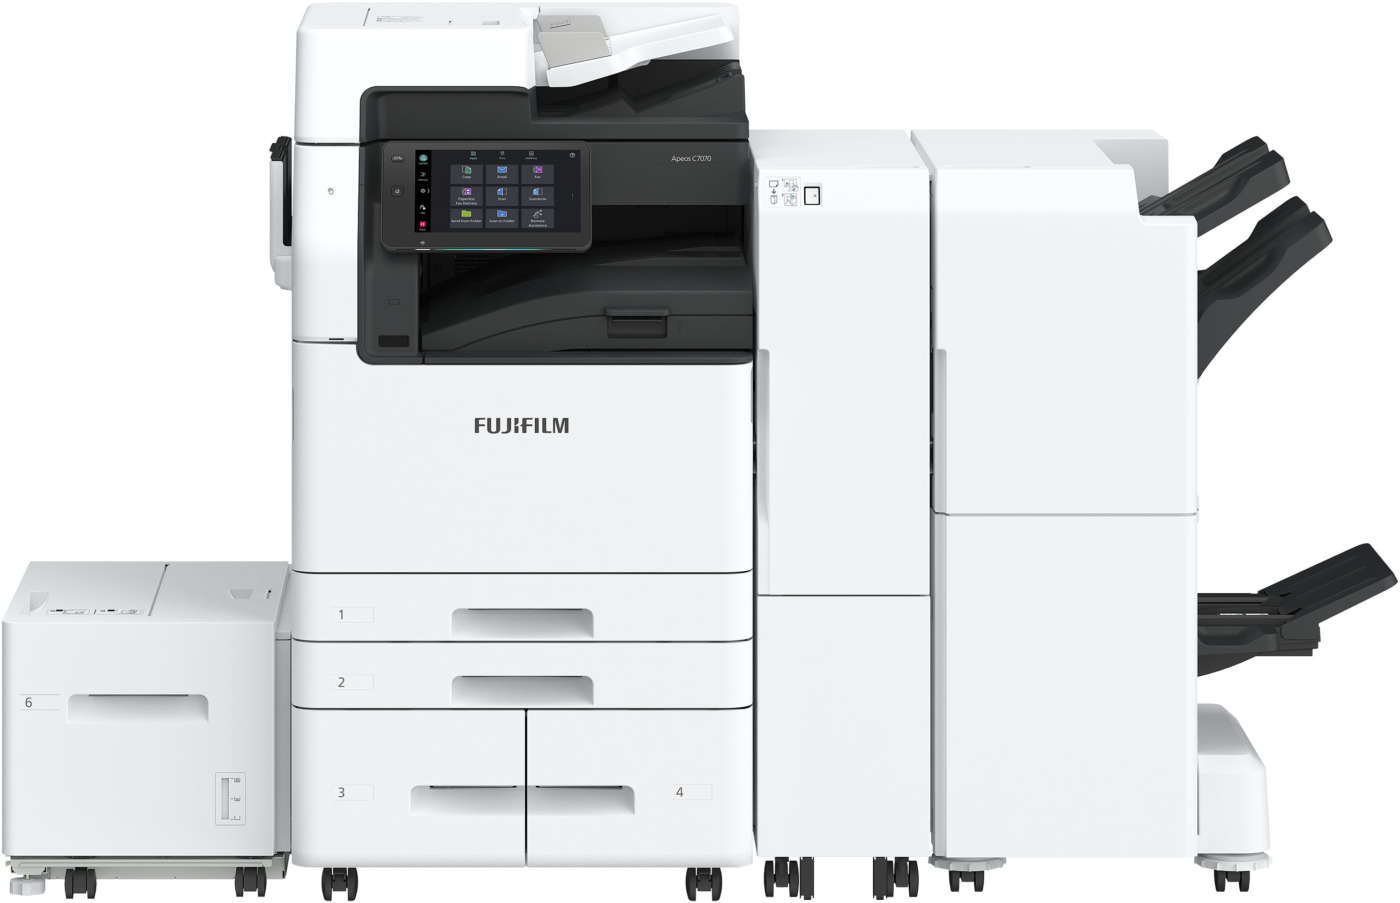 Fujifilm announces the launch of the new Apeos printer series in Europe